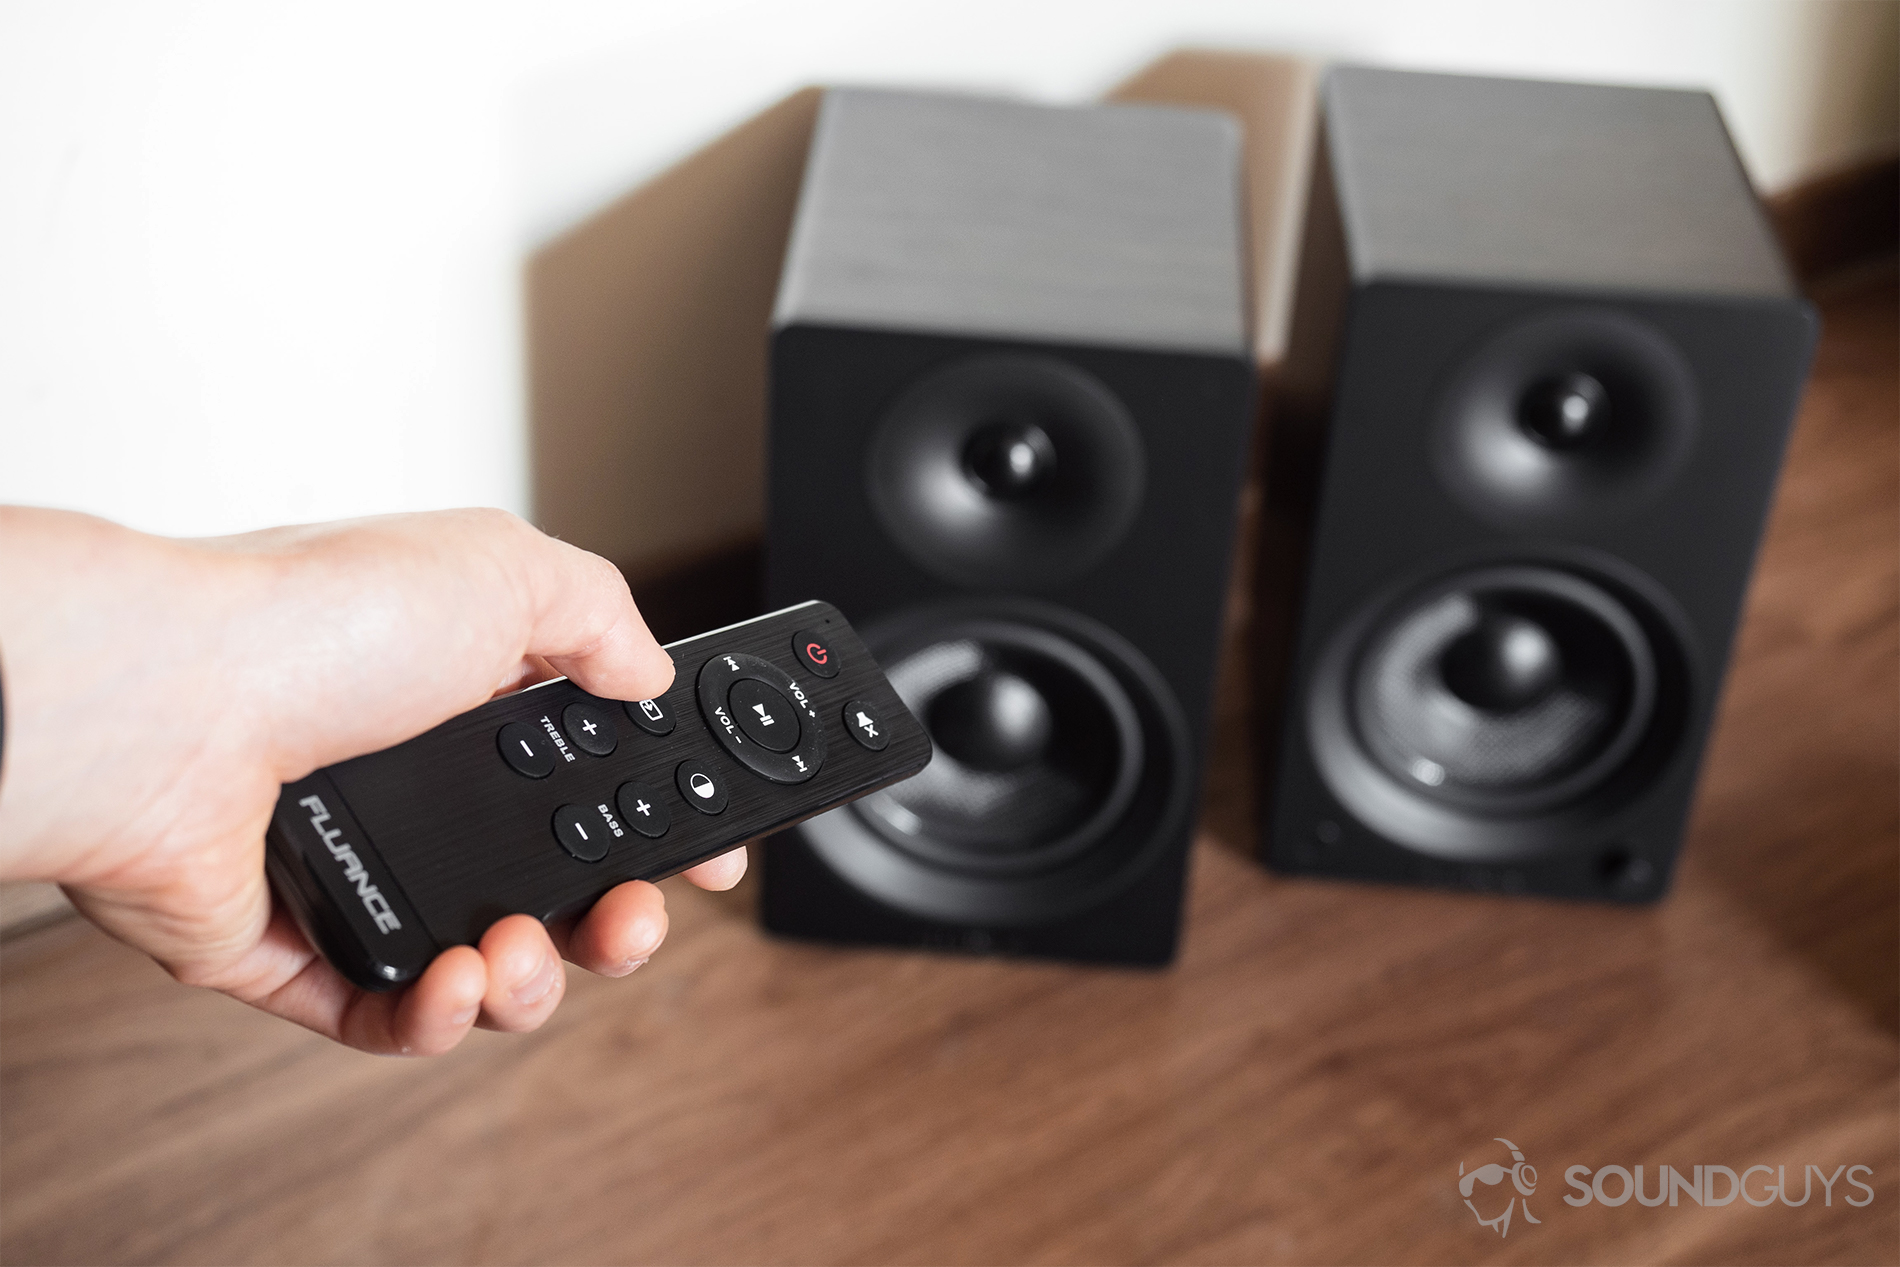 Fluance Ai40 review: The remote being used to make adjustments to the speakers.